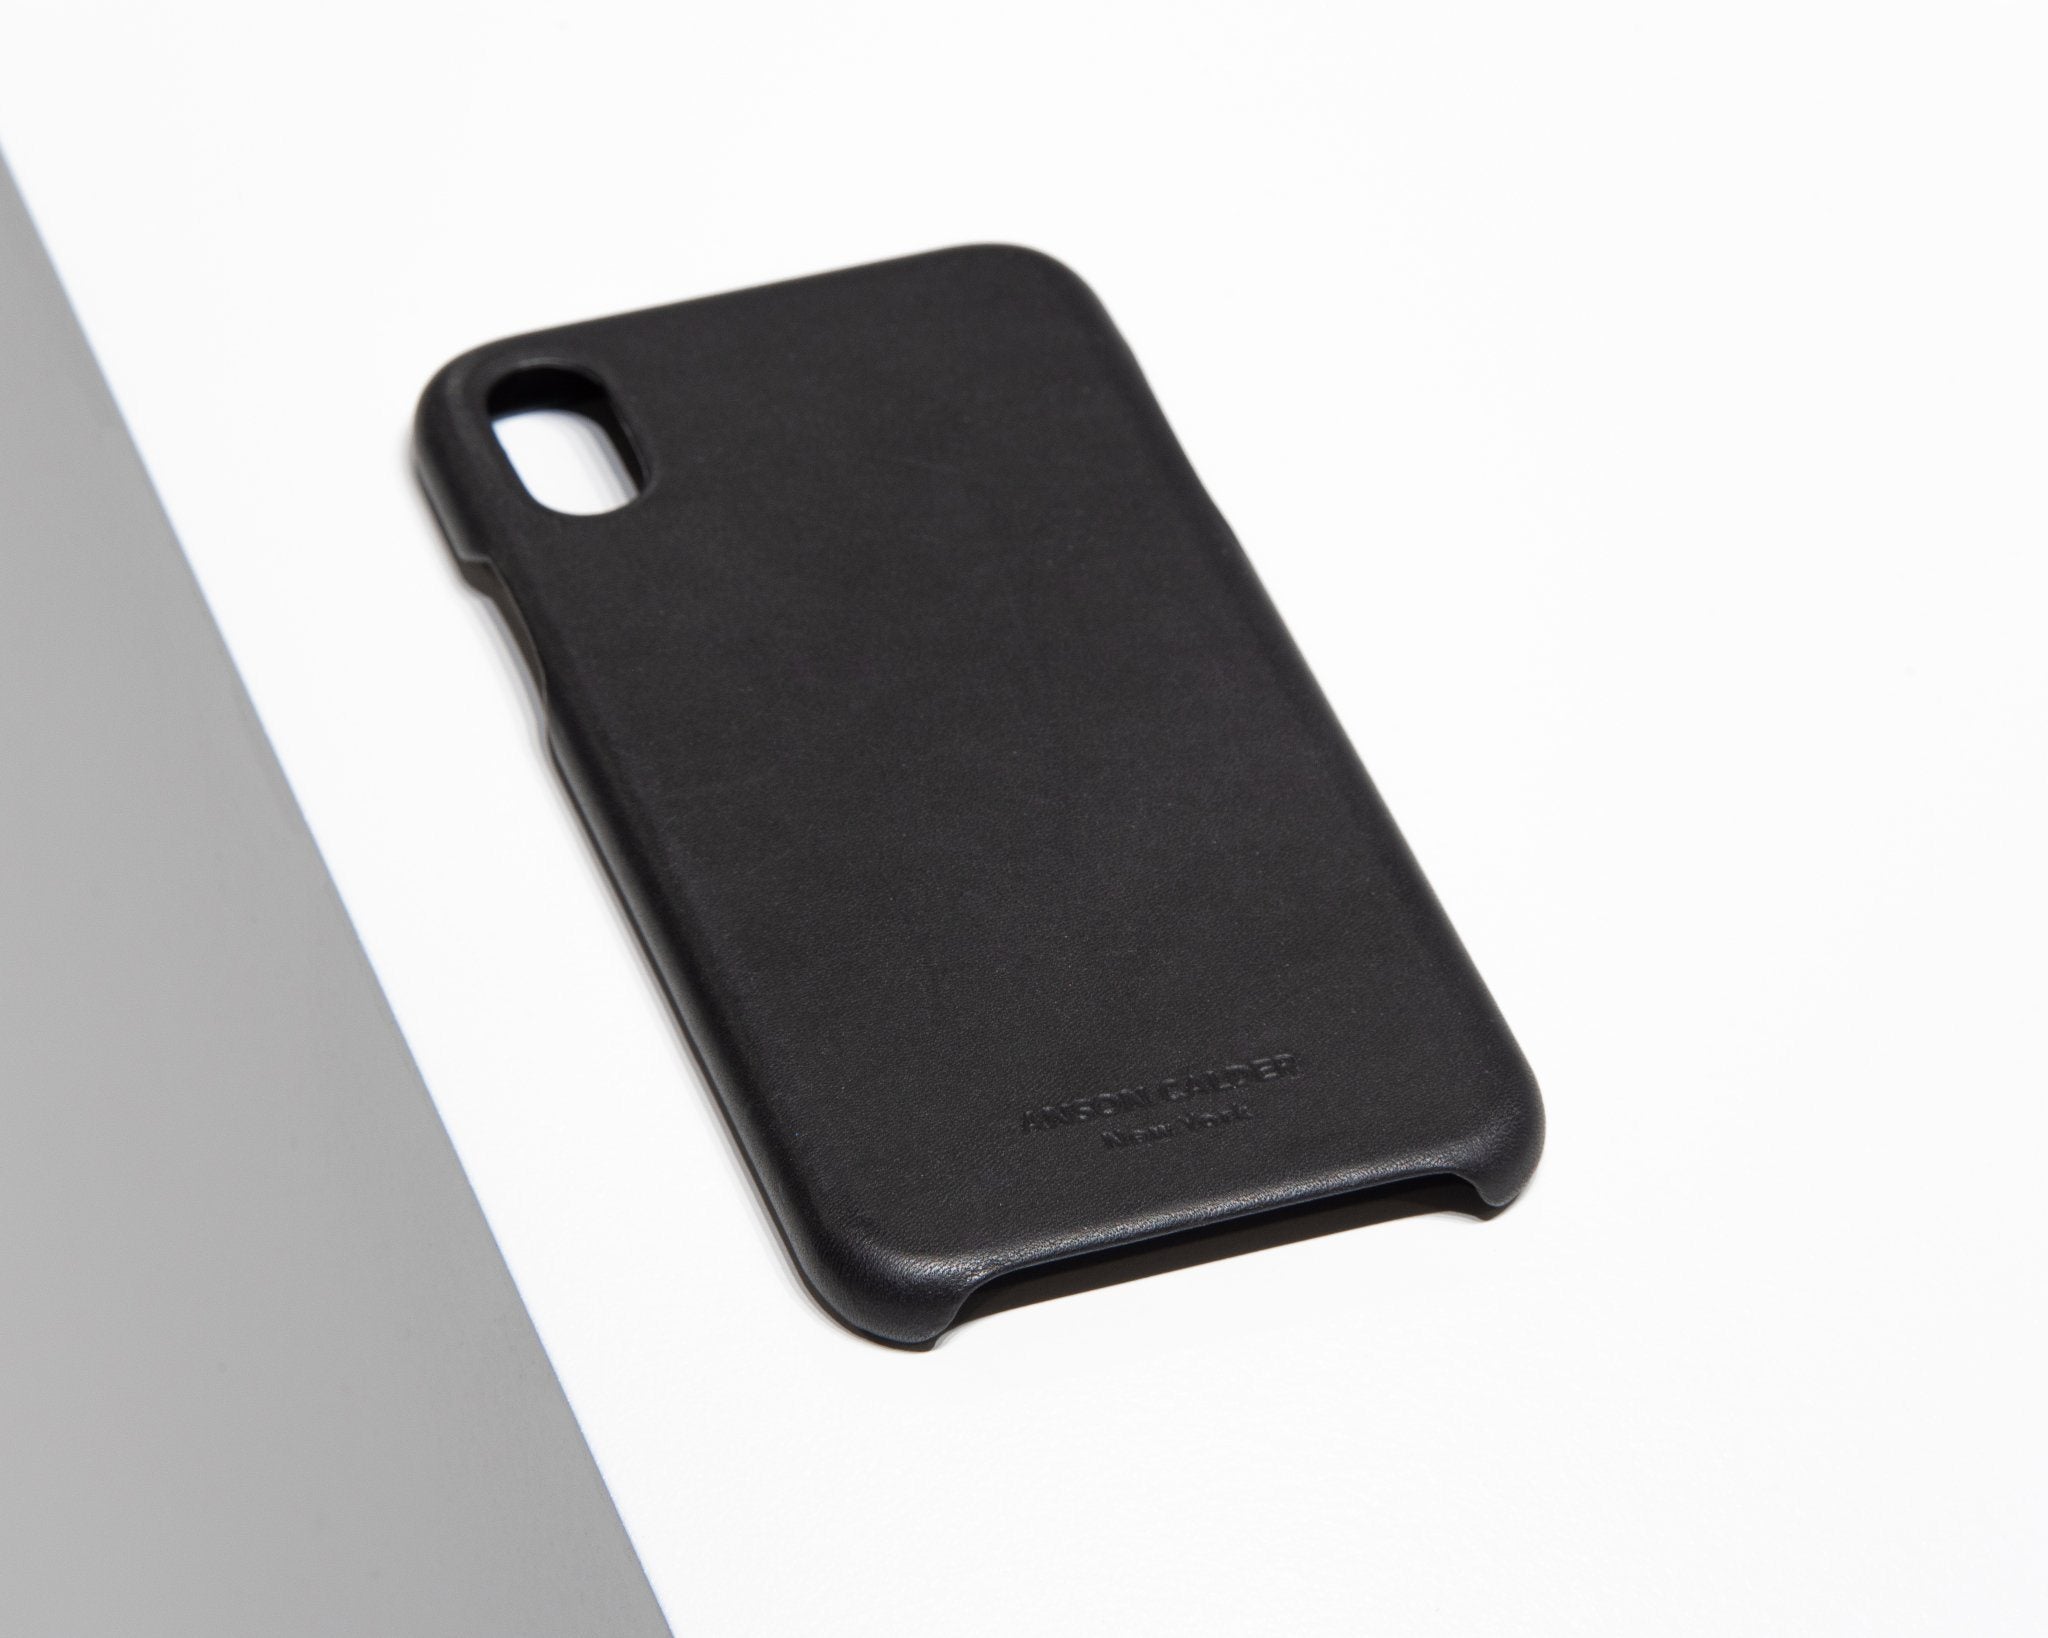 Leather iPhone Cases